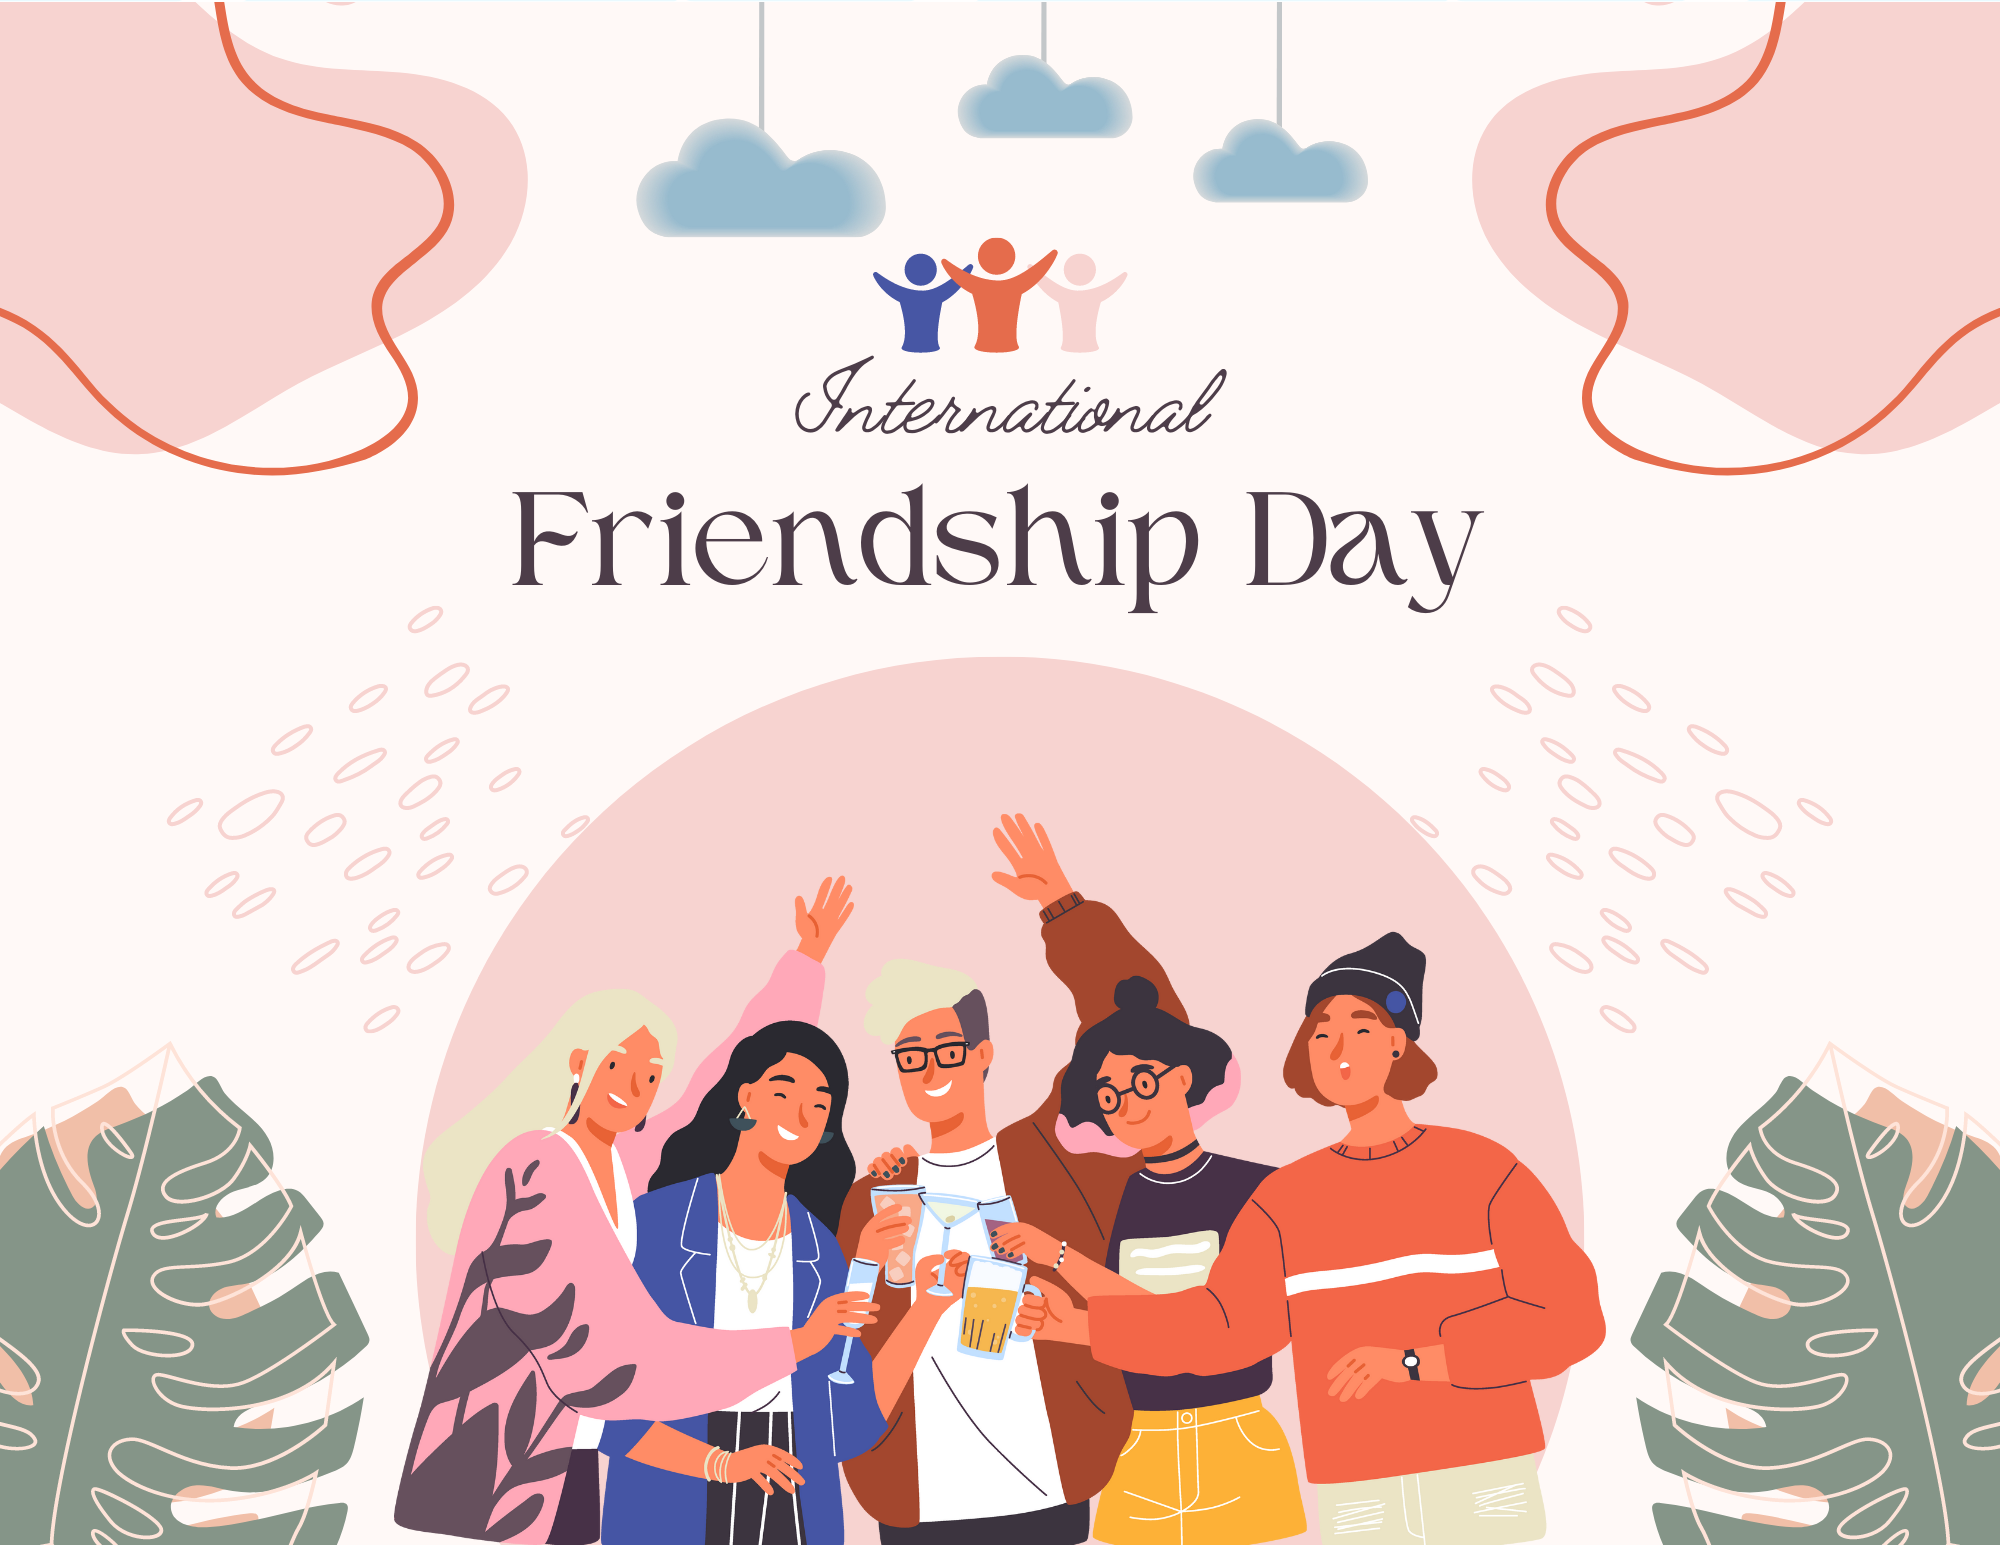 A picture of diverse hands reaching out to each other, symbolizing the International Day of Friendship 2023!